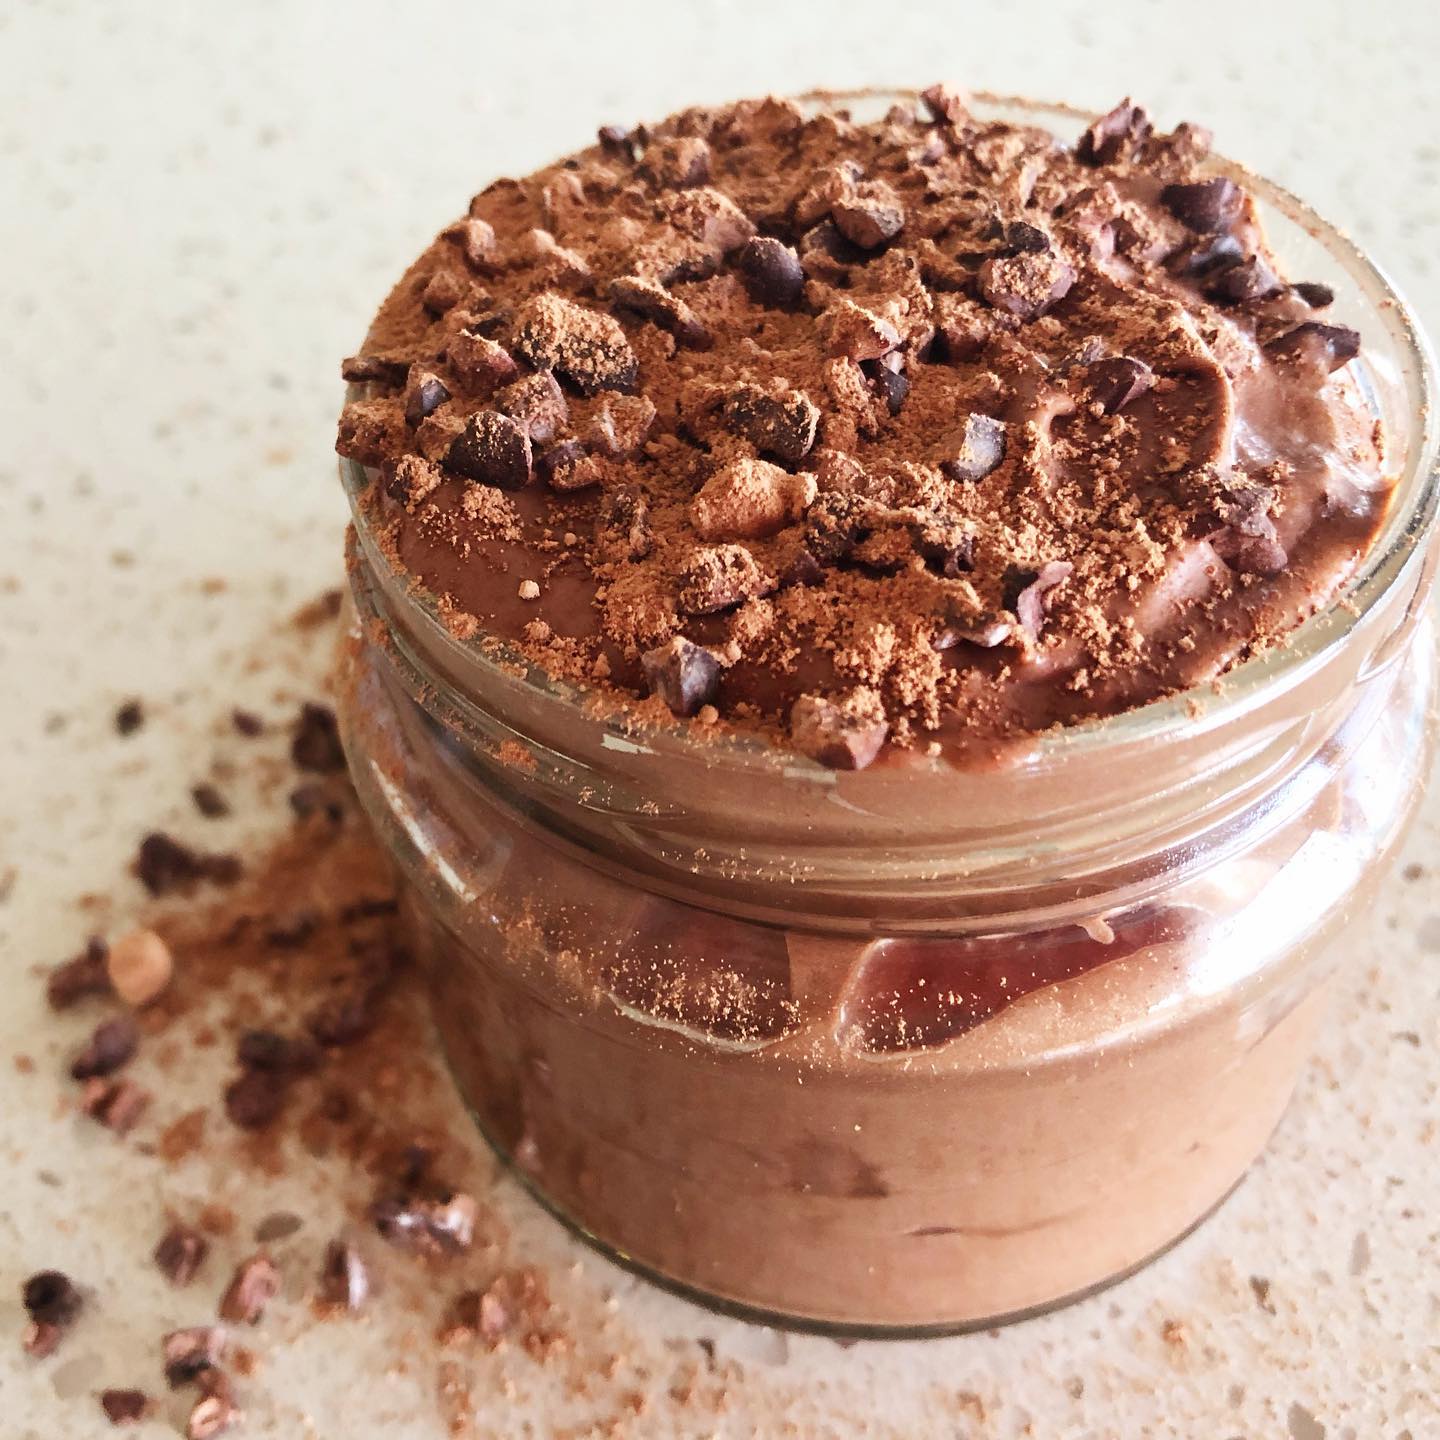 62223528 2624063437612588 7609547472771219456 o - 4 Ingredient Rich Fluffy Dairy Free Vegan Chocolate Mousse